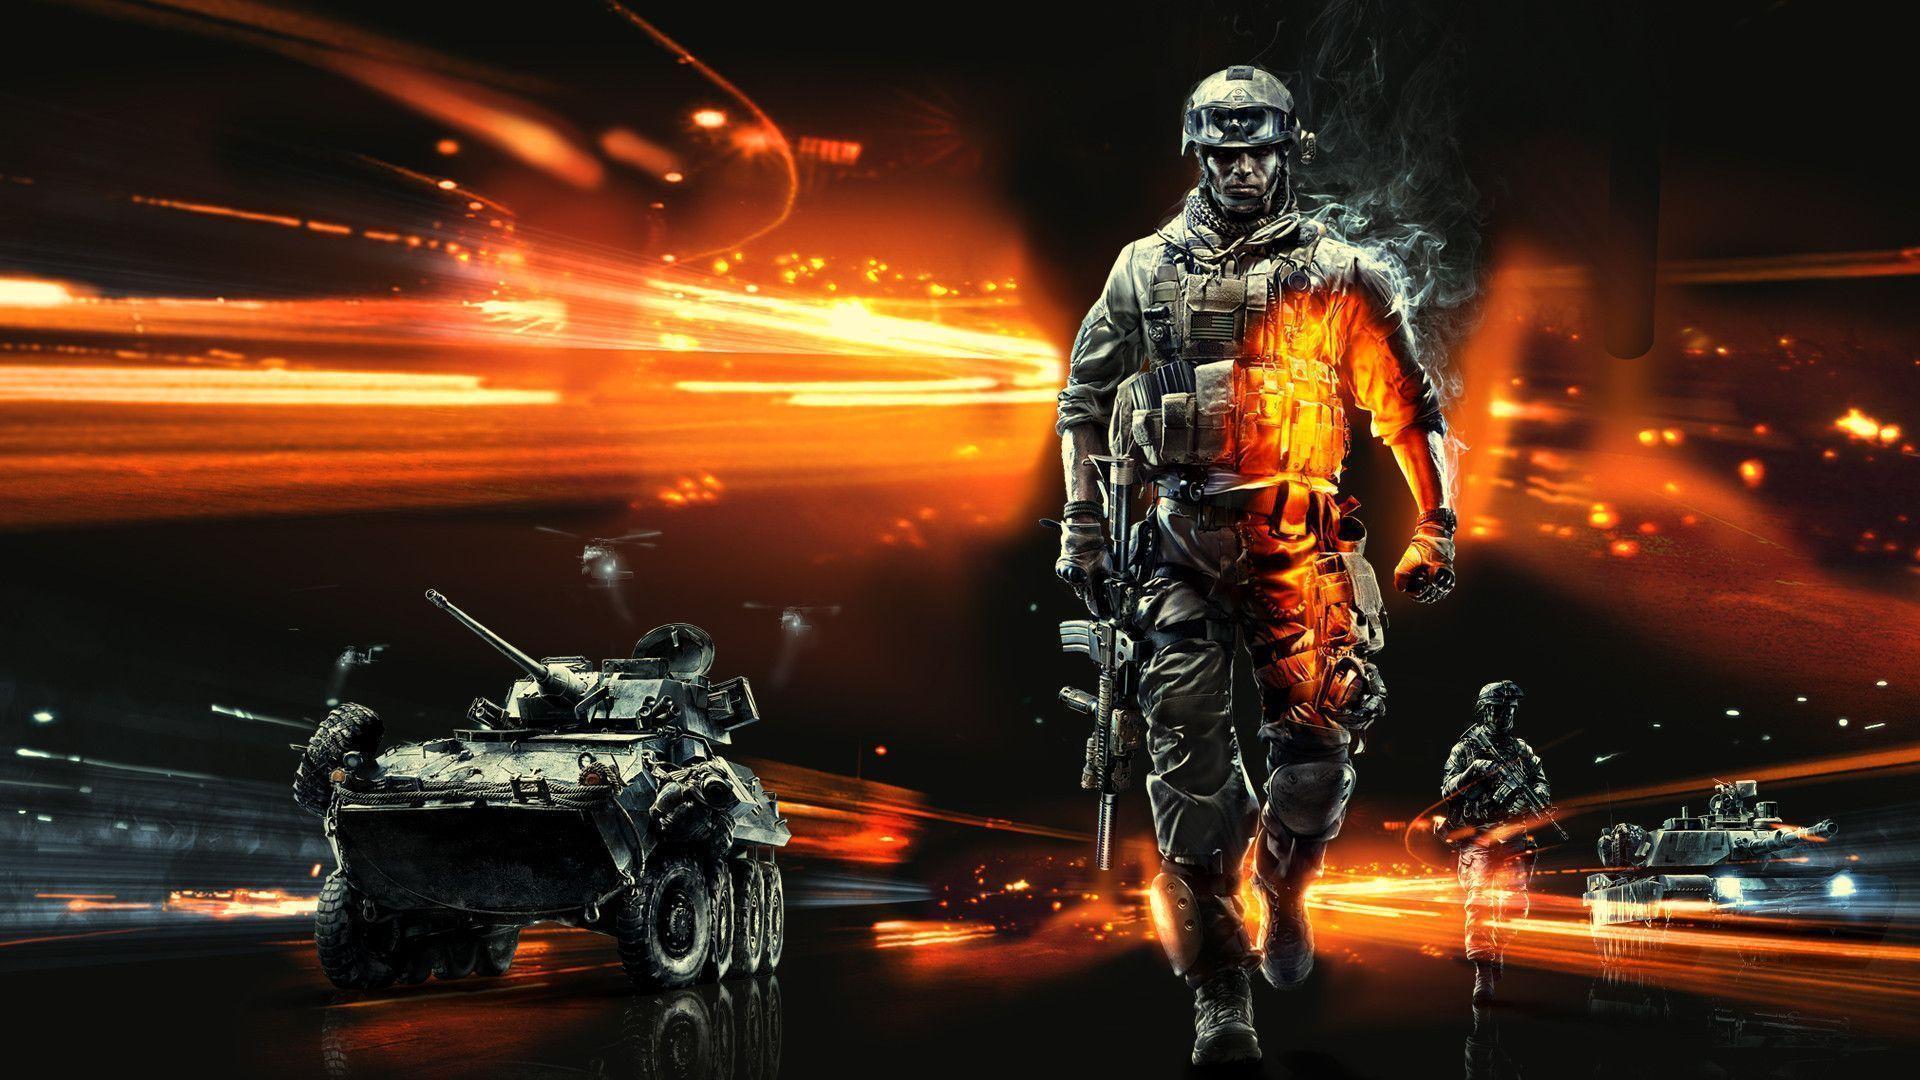 bf3 wallpaper Search Engine